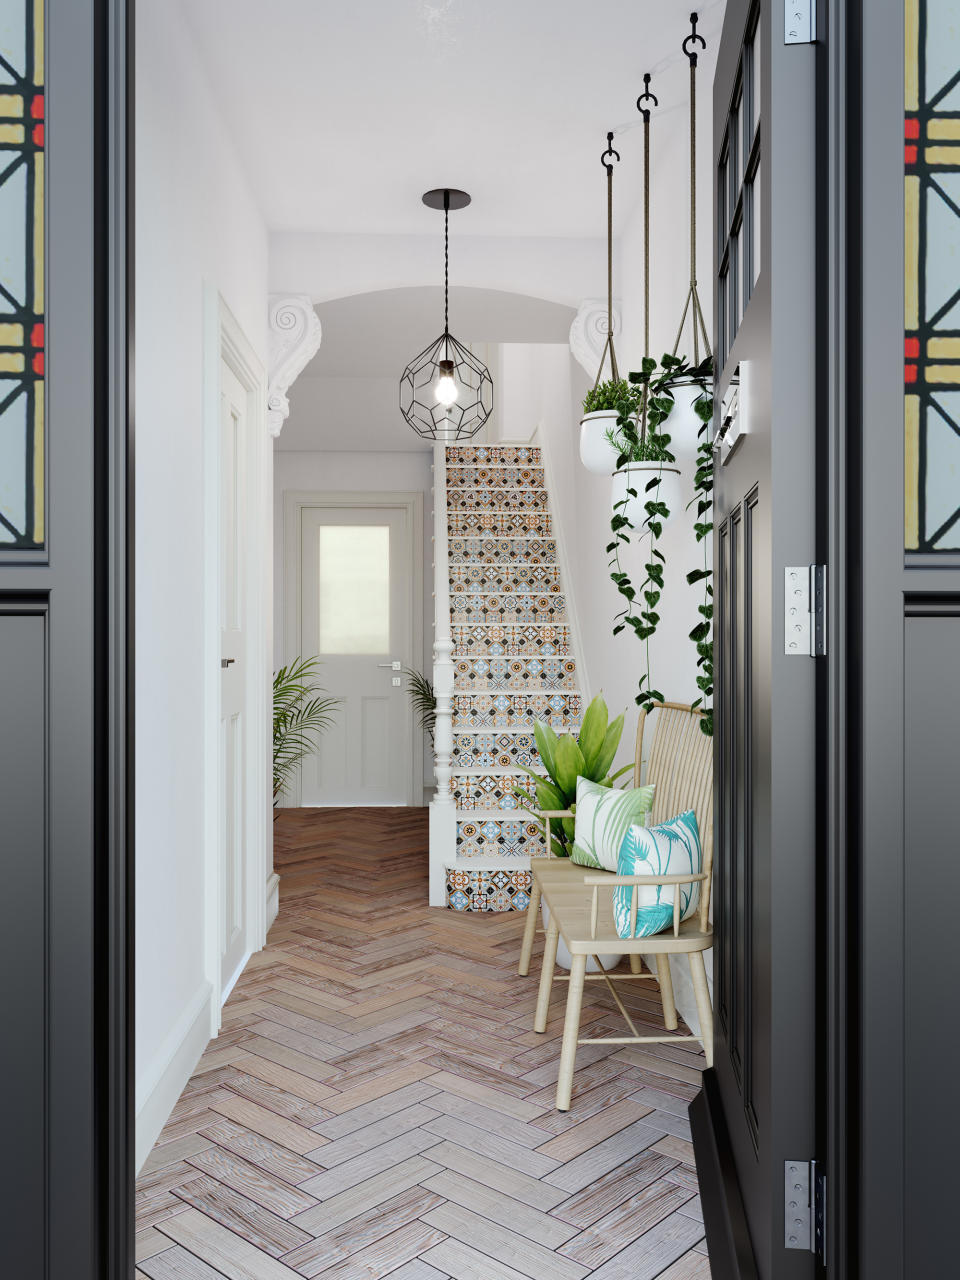 <p> Tiles are a key part of traditional hallways, however, they are less common on the stairs themselves. However, as seen in this home, tiles can make a beautiful feature of this area that is often overlooked. </p> <p> Usually, only one or two tiles high, this small area gives you the opportunity to incorporate beautiful highly decorative tiles into your space. Since the space is only small, you can afford to use more expensive tiles without breaking the bank. You can also splurge in terms of pattern. </p>